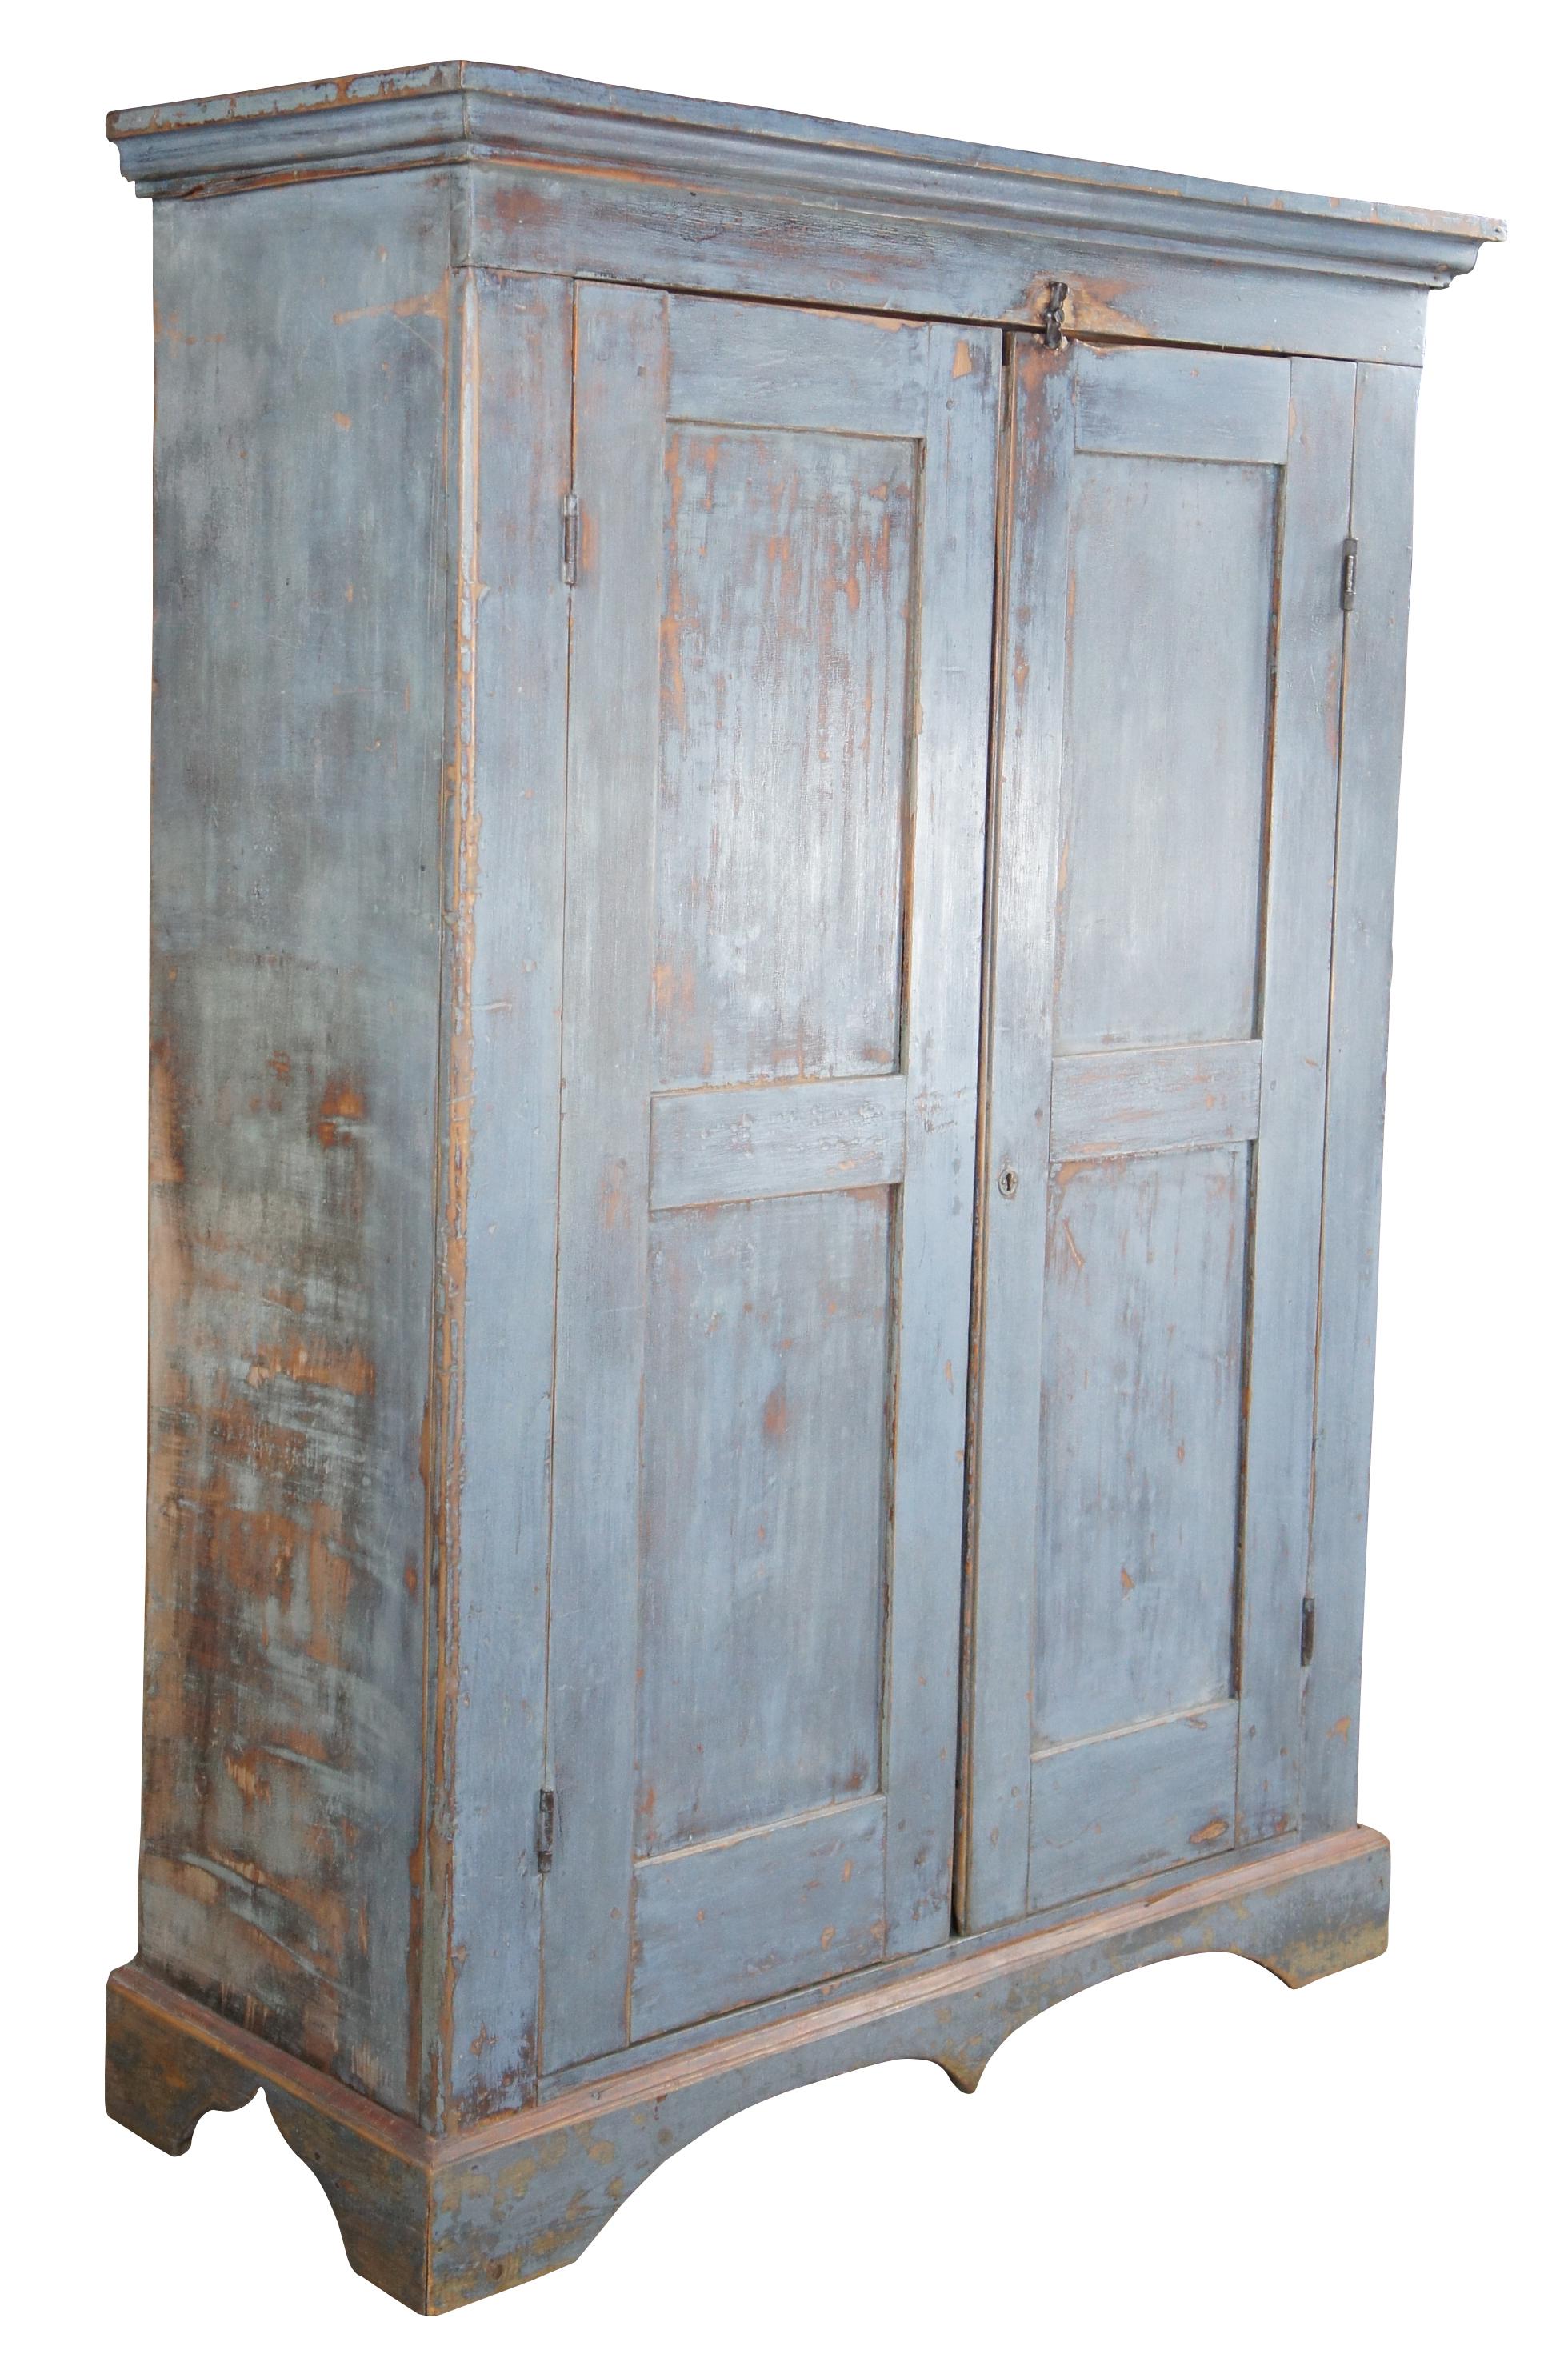 An elegantly painted blue Jelly country cupboard, wardrobe or linen press. Circa early 1900s. A rectangular form made from American Pine with the interior shelves. Naturally distressed with a warm aged patina. A medium bodied size this that is very